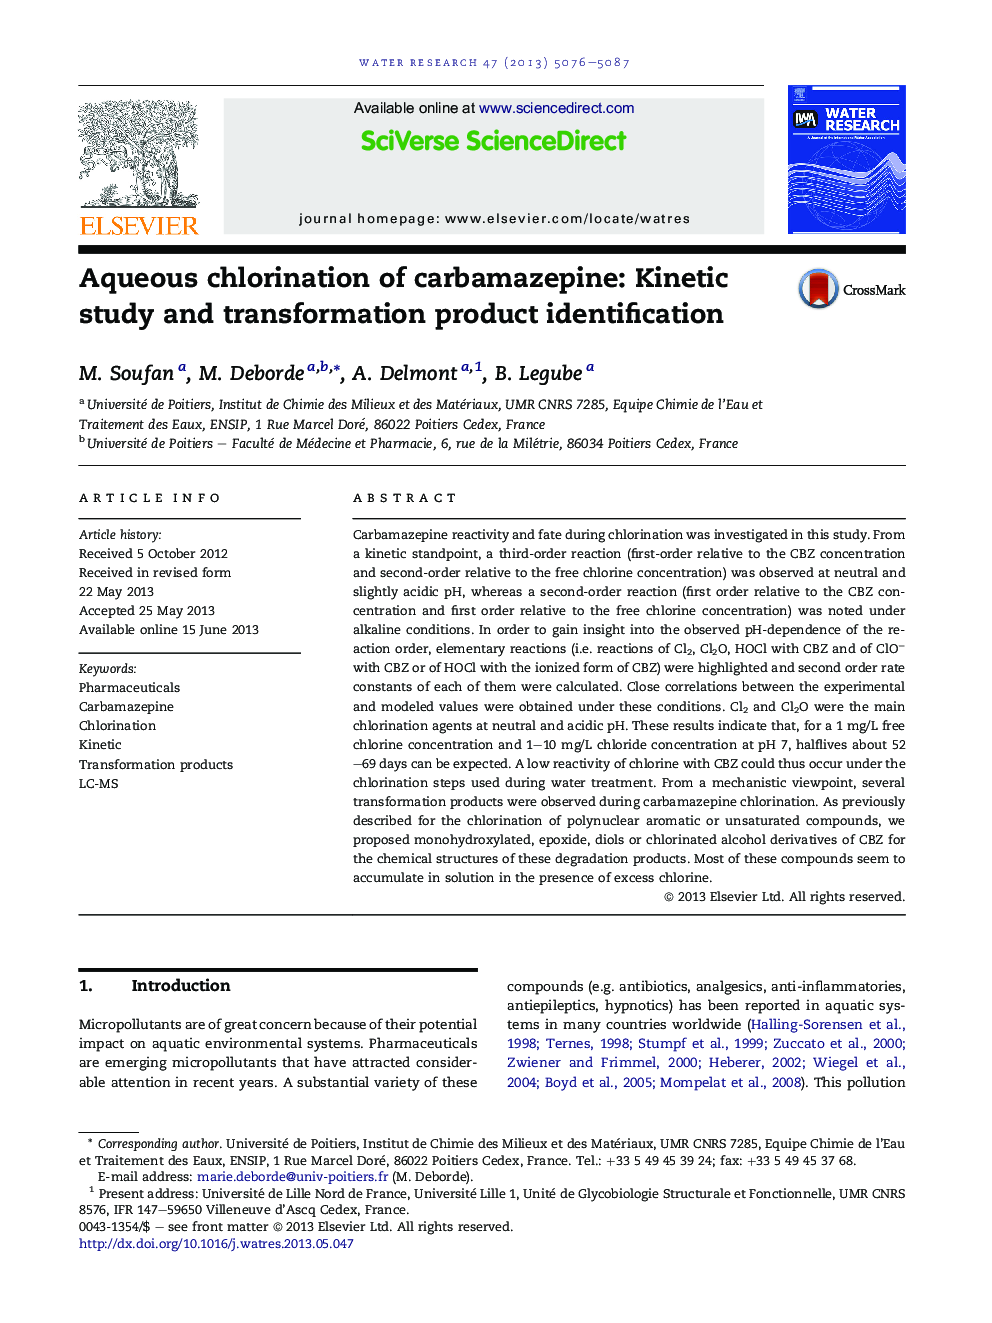 Aqueous chlorination of carbamazepine: Kinetic study and transformation product identification